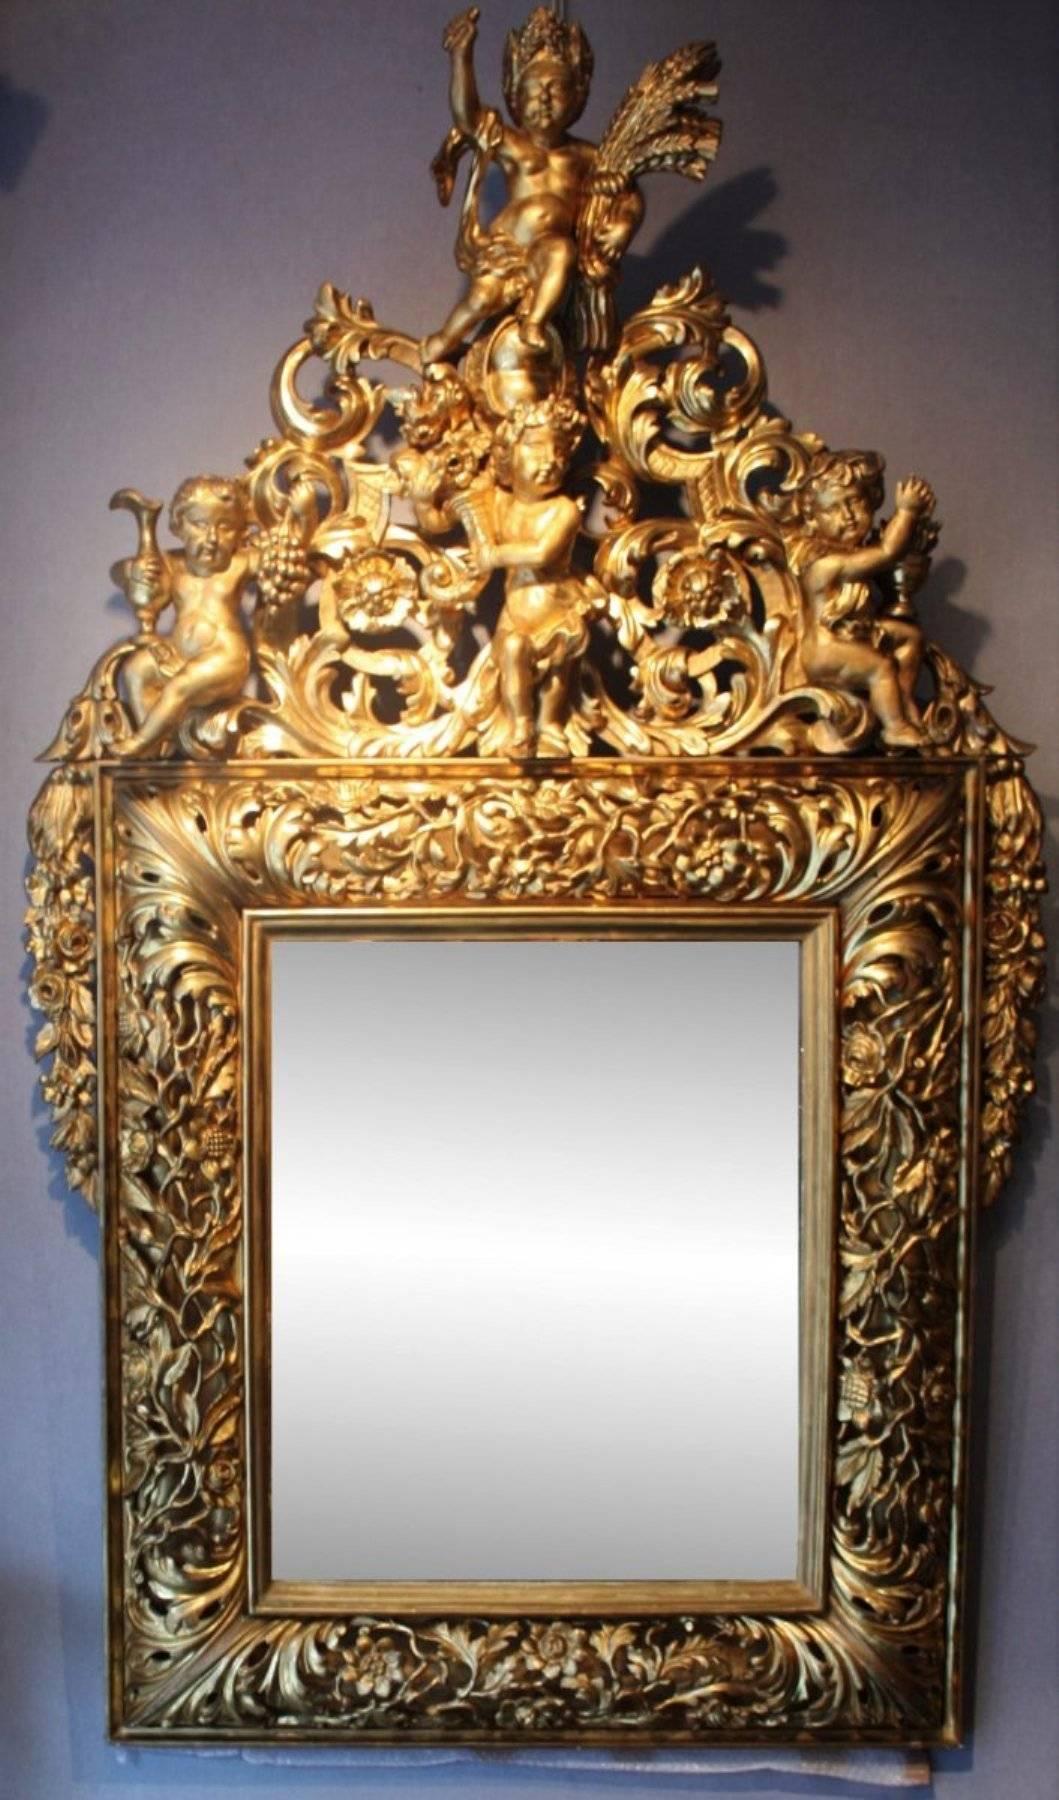 Grand 18th century Italian carved open-work giltwood mirror depicting the four seasons.
The frame is made of open-work carved giltwood decorated with flowers and leaves forming acanthus leaves scrolls. The pediment is lavishly carved and adorned